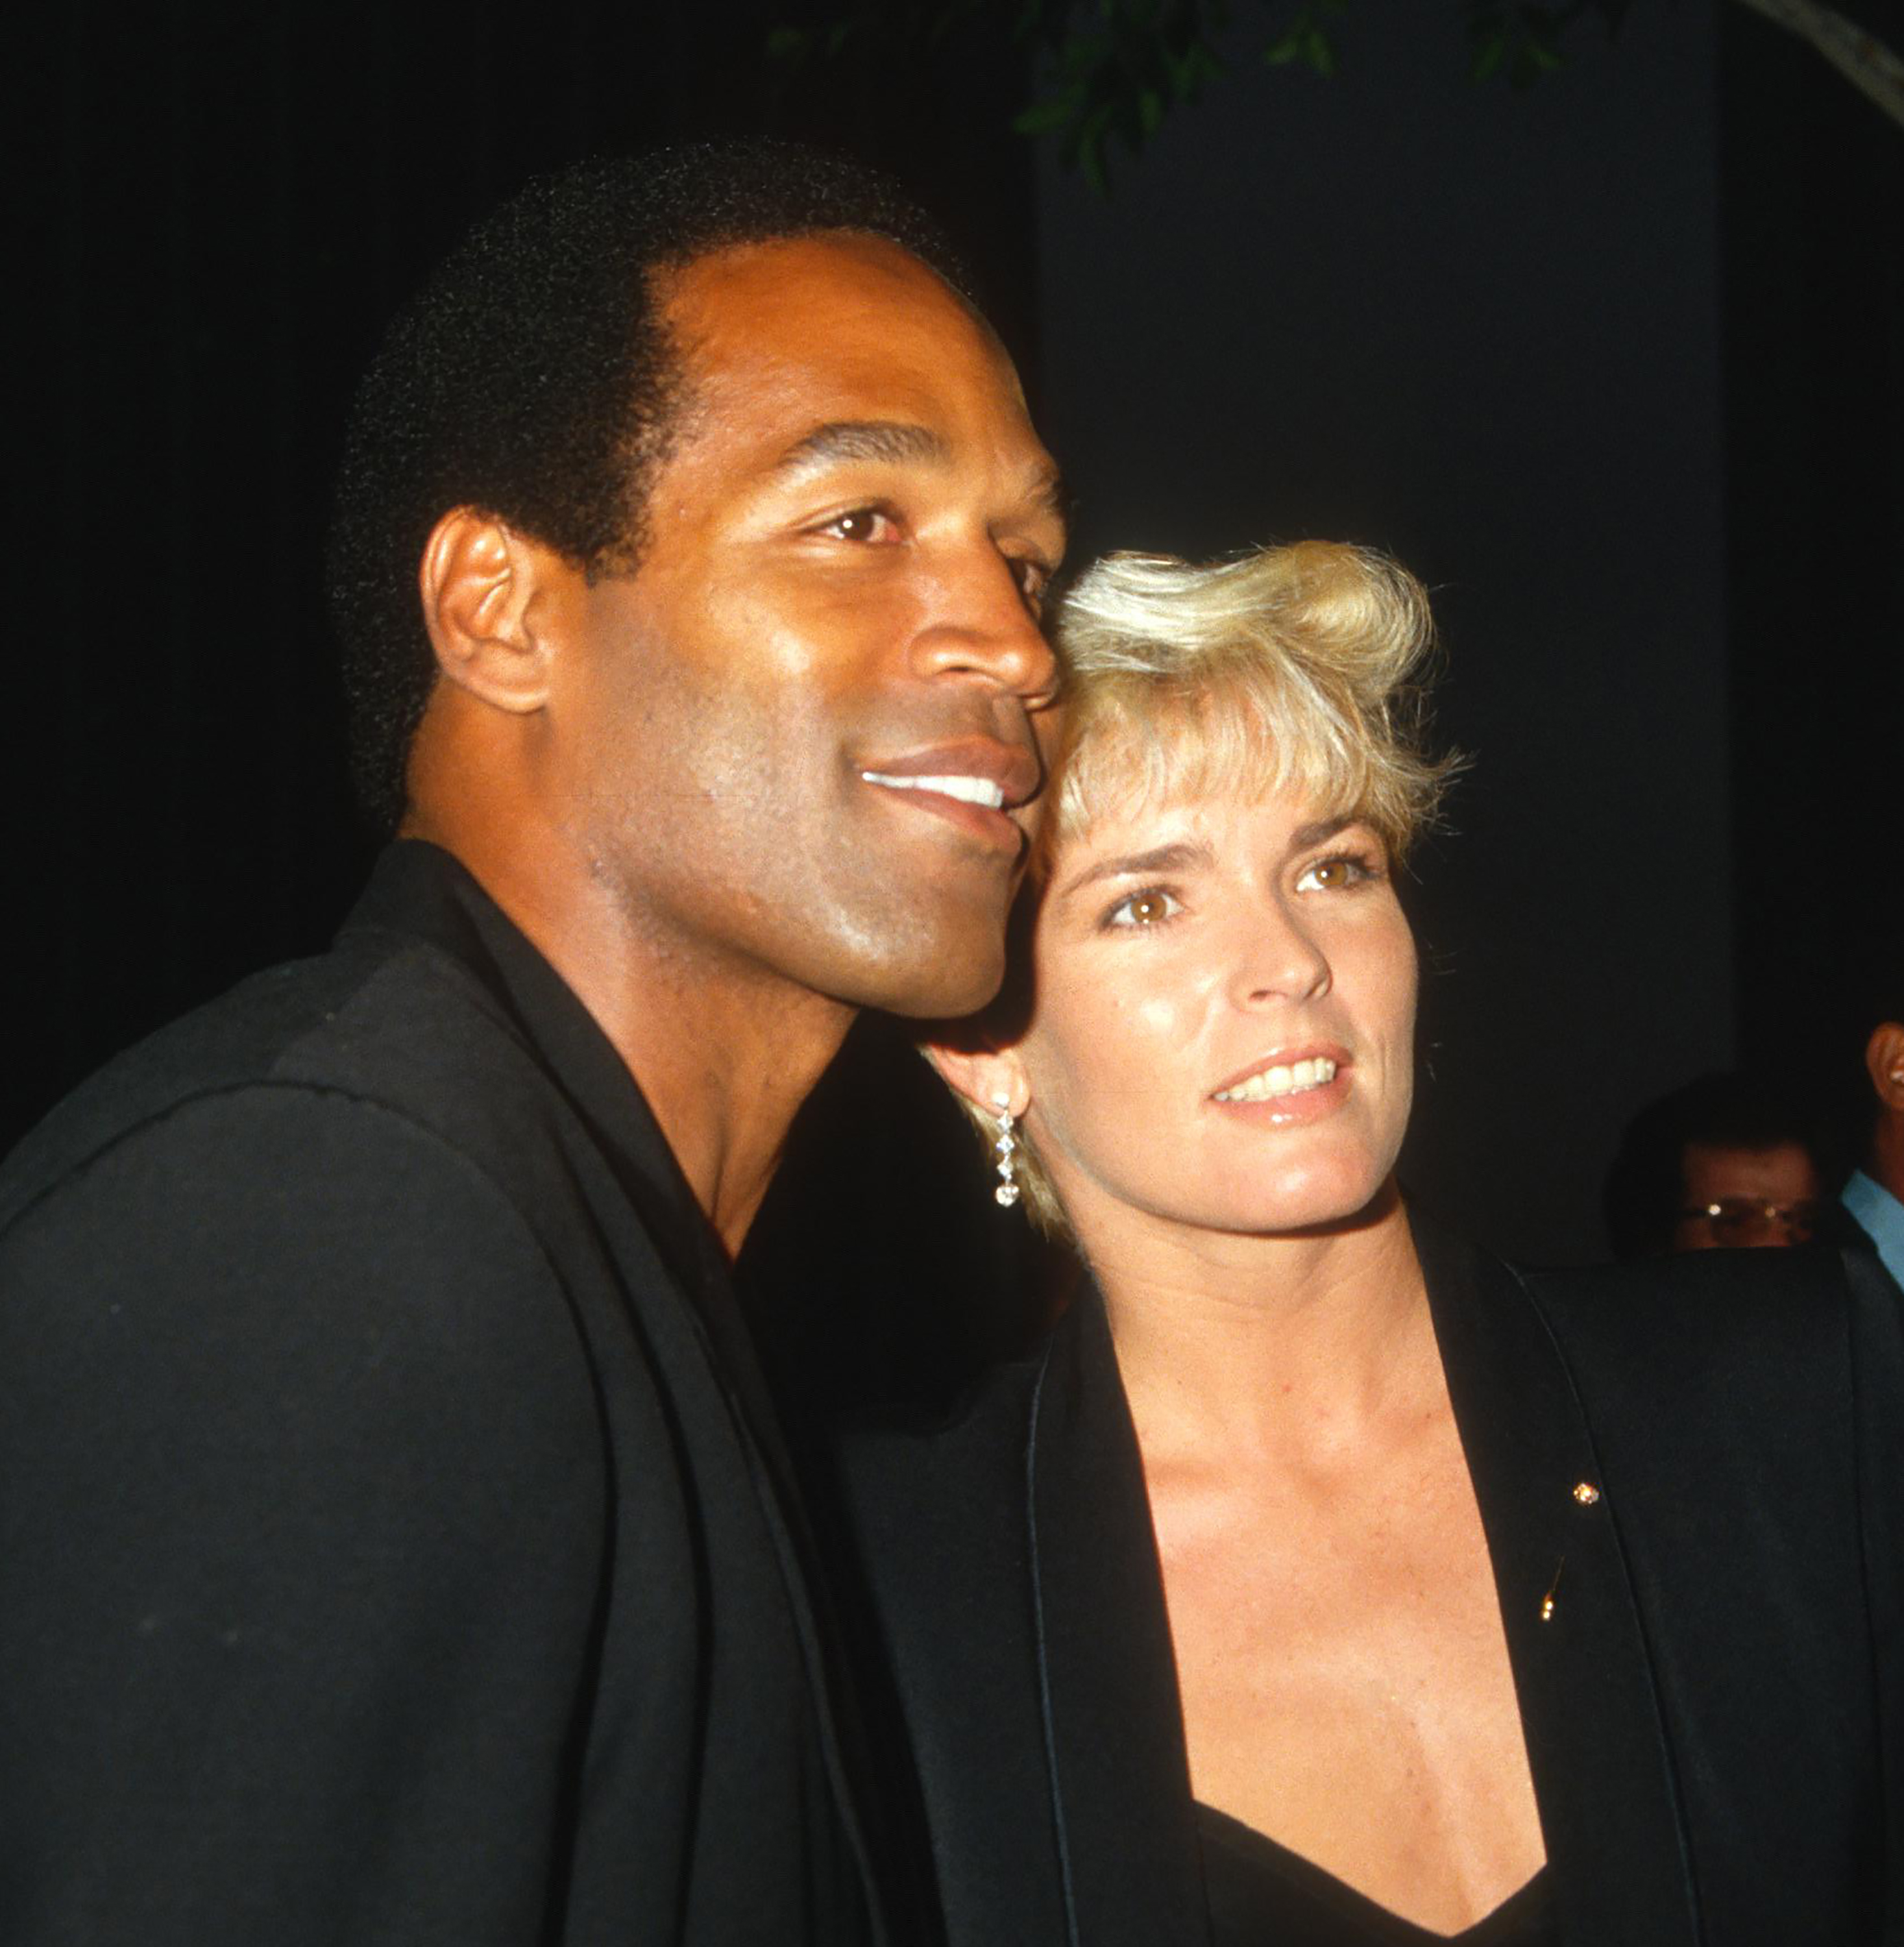 O.J. Simpson and Nicole Brown Simpson attend a movie premiere together in 1987